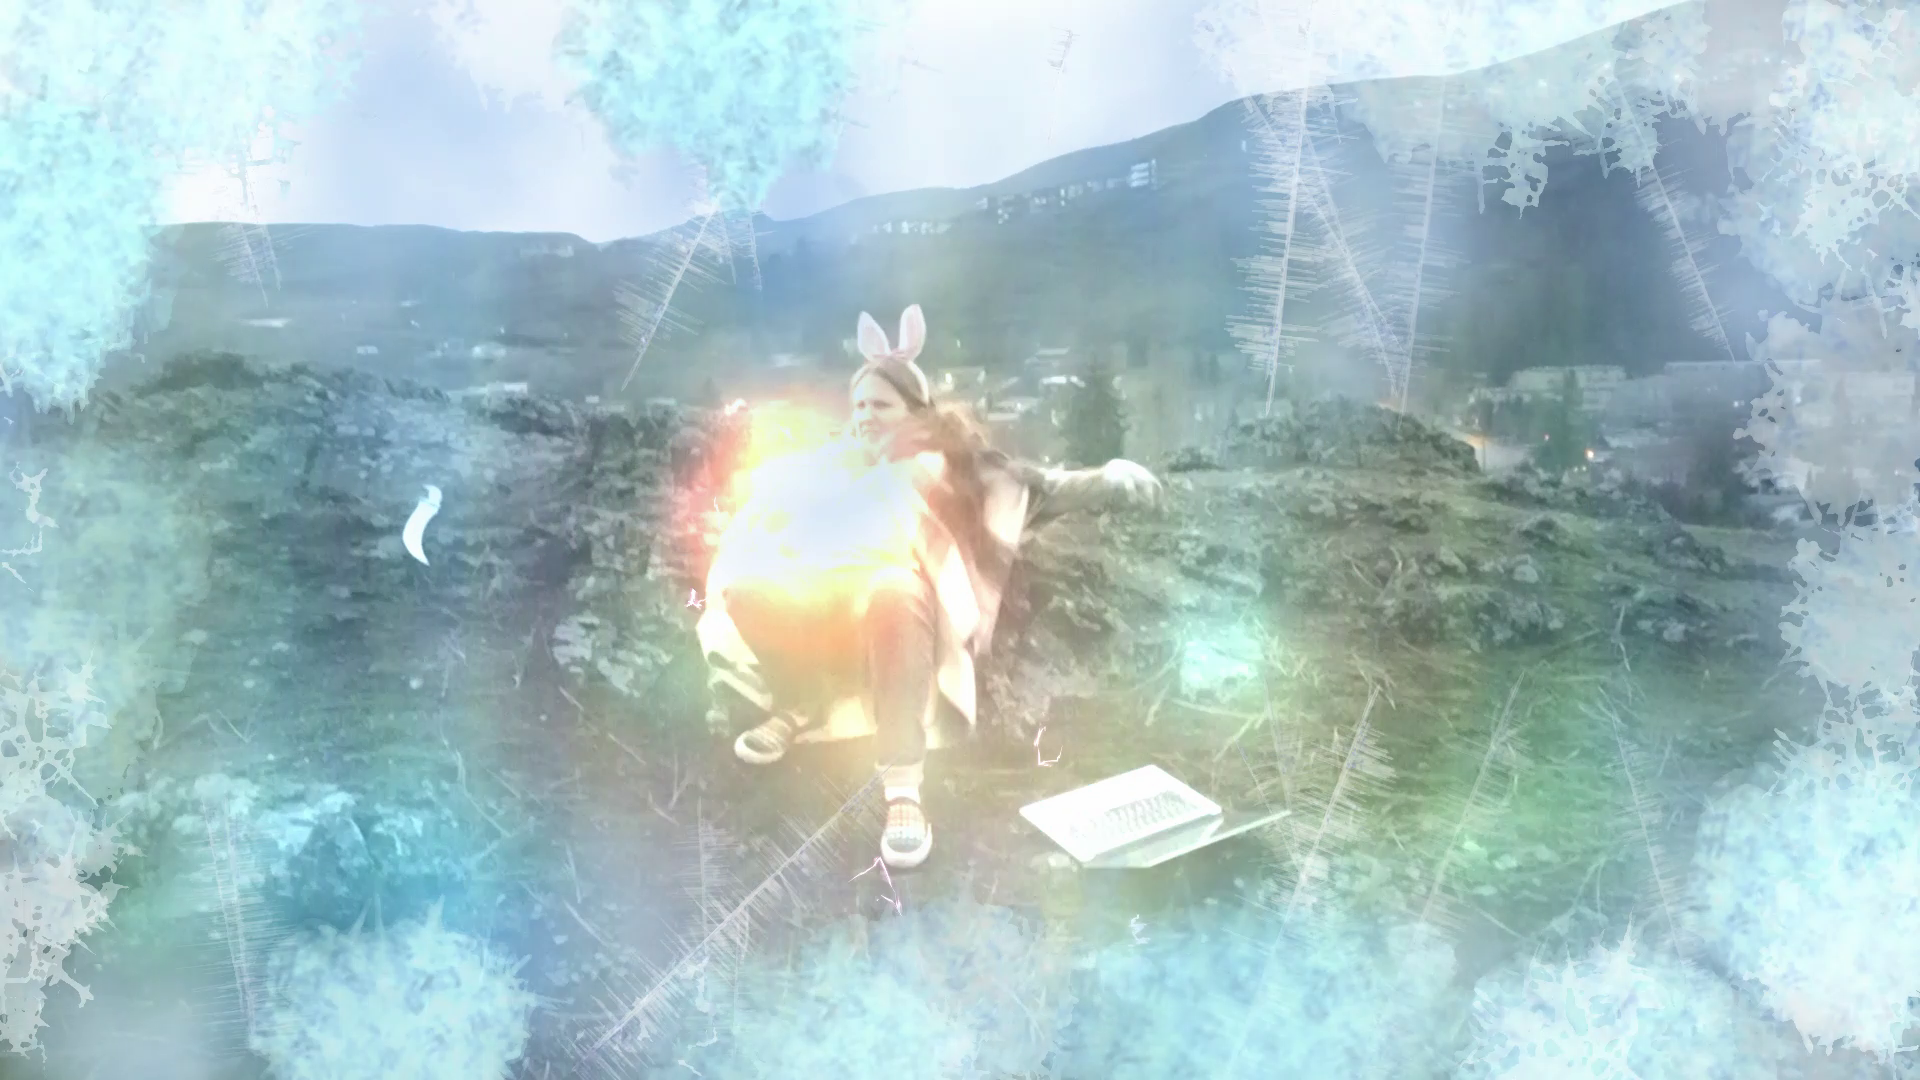 A prone woman in bunny ears, fallen sword and laptop at her side, rallies her strength and releases a blast of magic